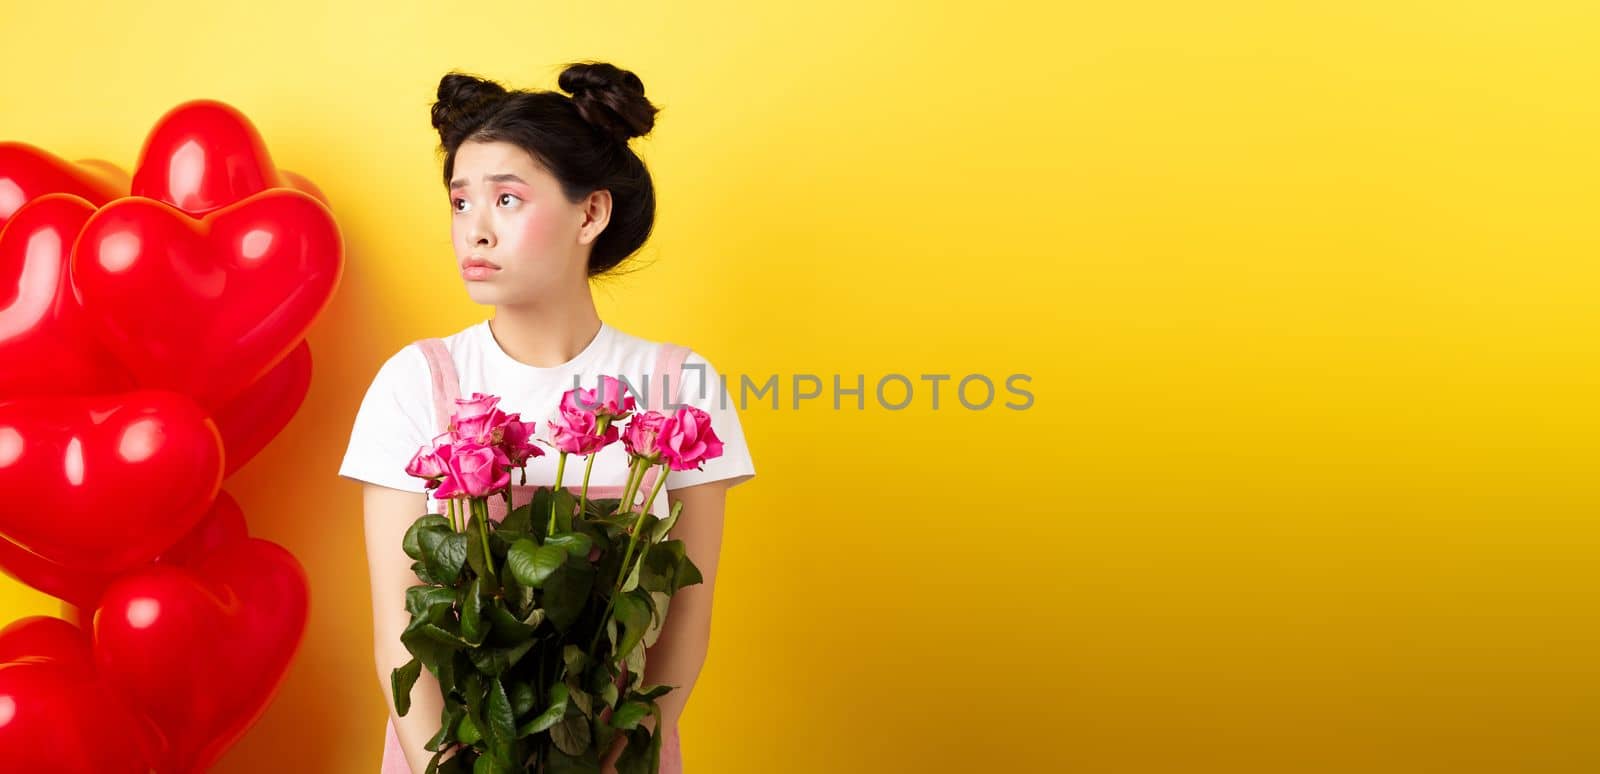 Happy Valentines day. Sad and lonely girl looking left upset, holding bouquet of roses, standing alone near red hearts balloons and frowning, yellow background by Benzoix